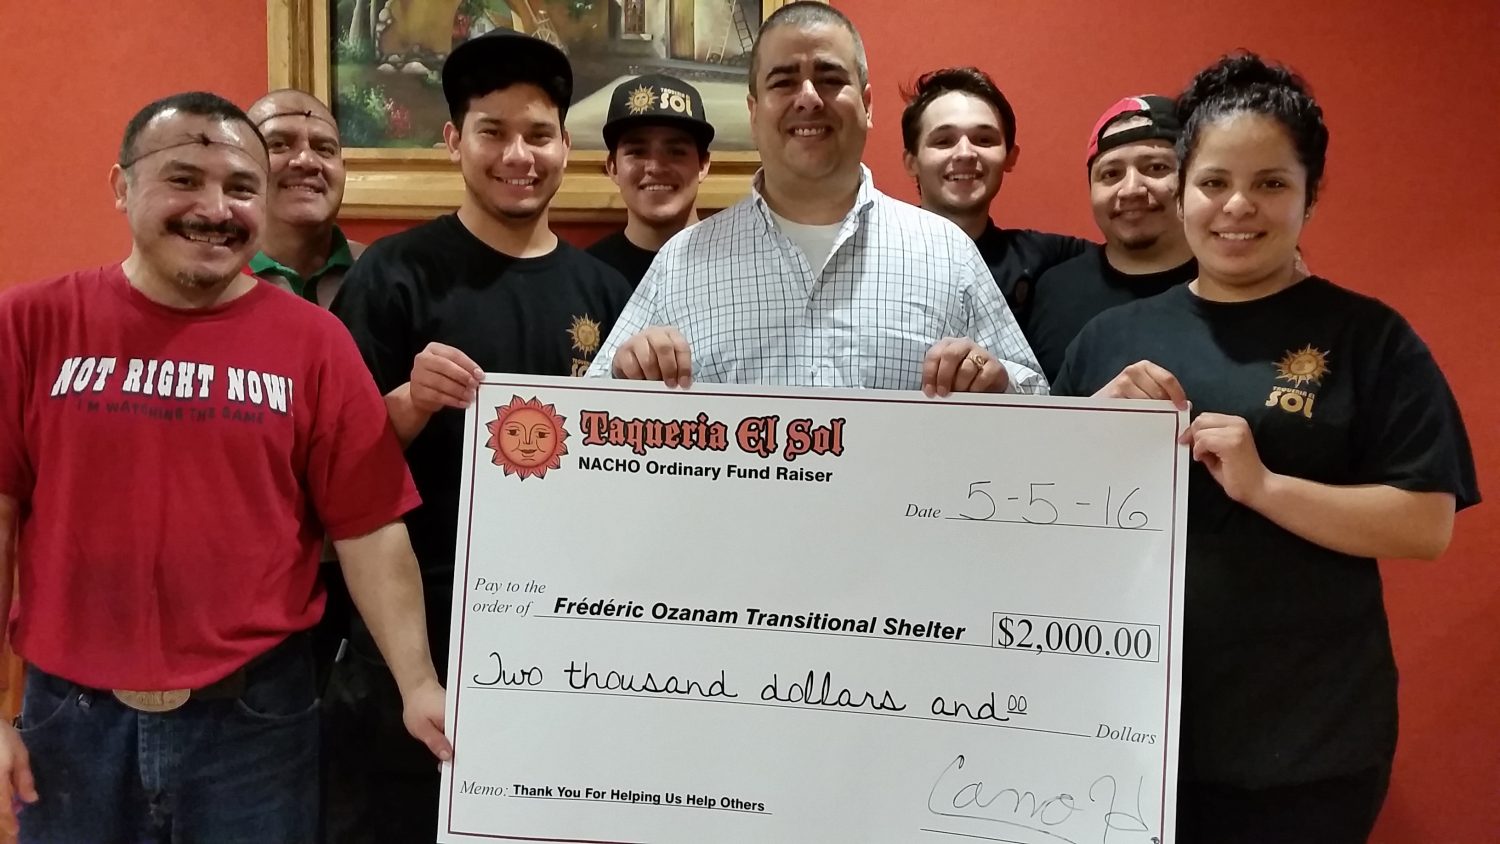 Taqueria El Sol staff pose with a check for $2,000, which will be donated to the Fredric Ozanam Transitional Shelter as a result of Nacho Ordinary Fundraiser held at the restaurant on May 5.